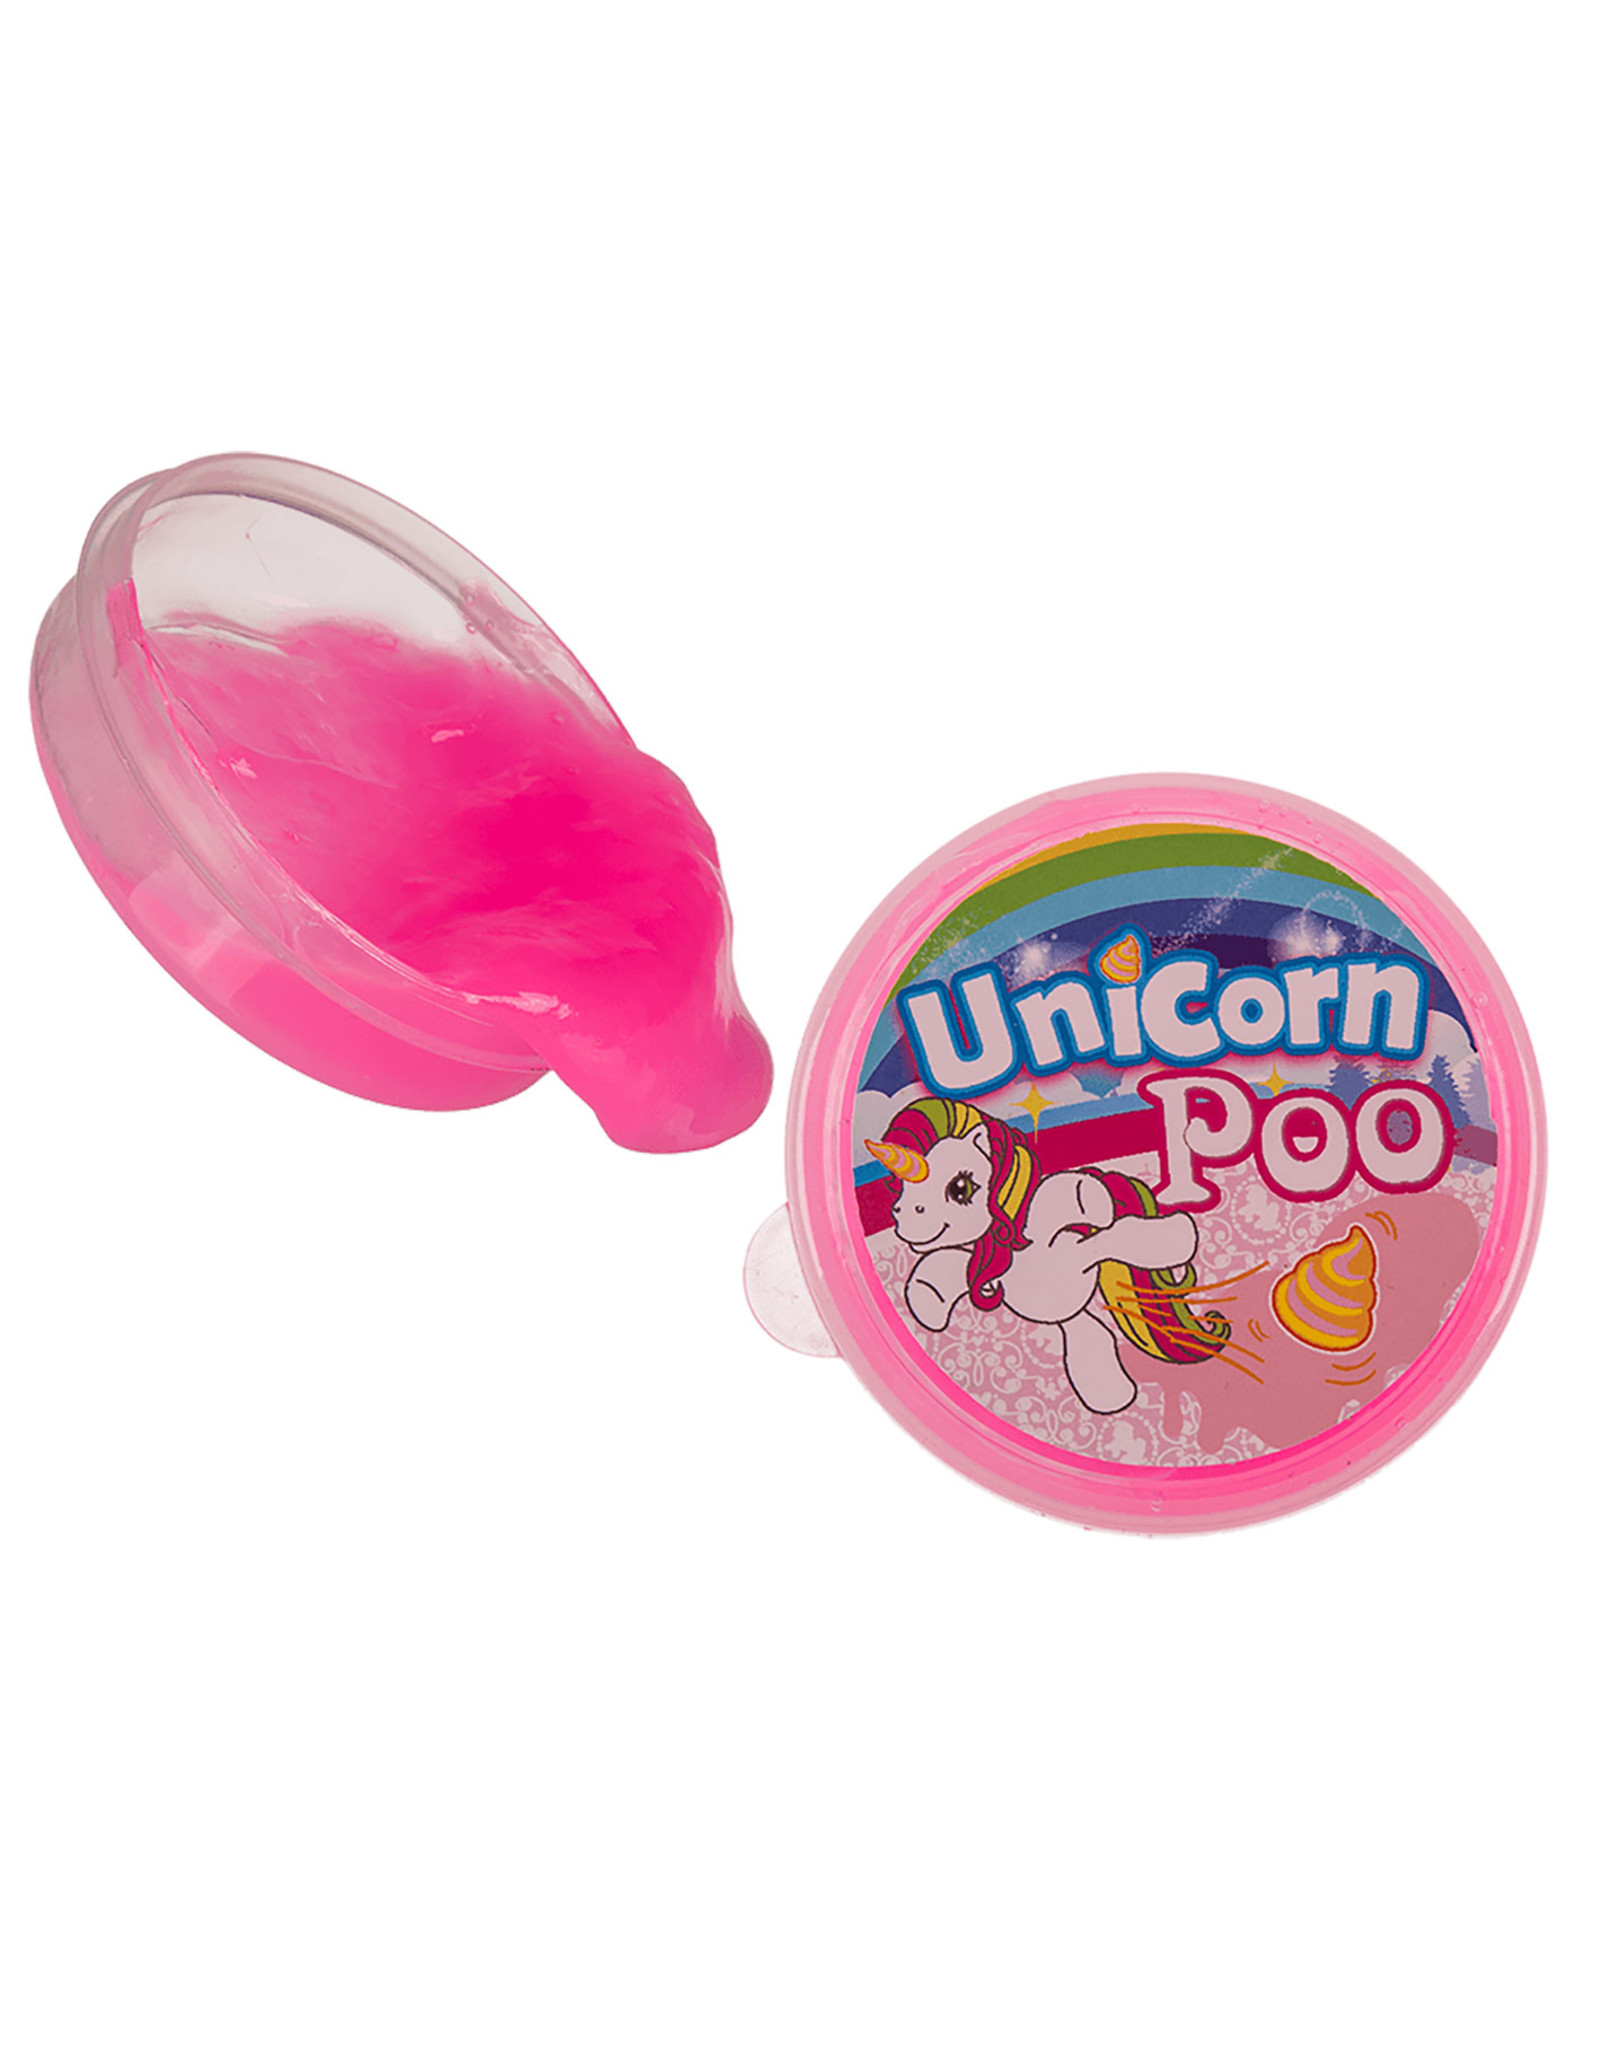 Out of the Blue KG Unicorn Poo Putty 40gr